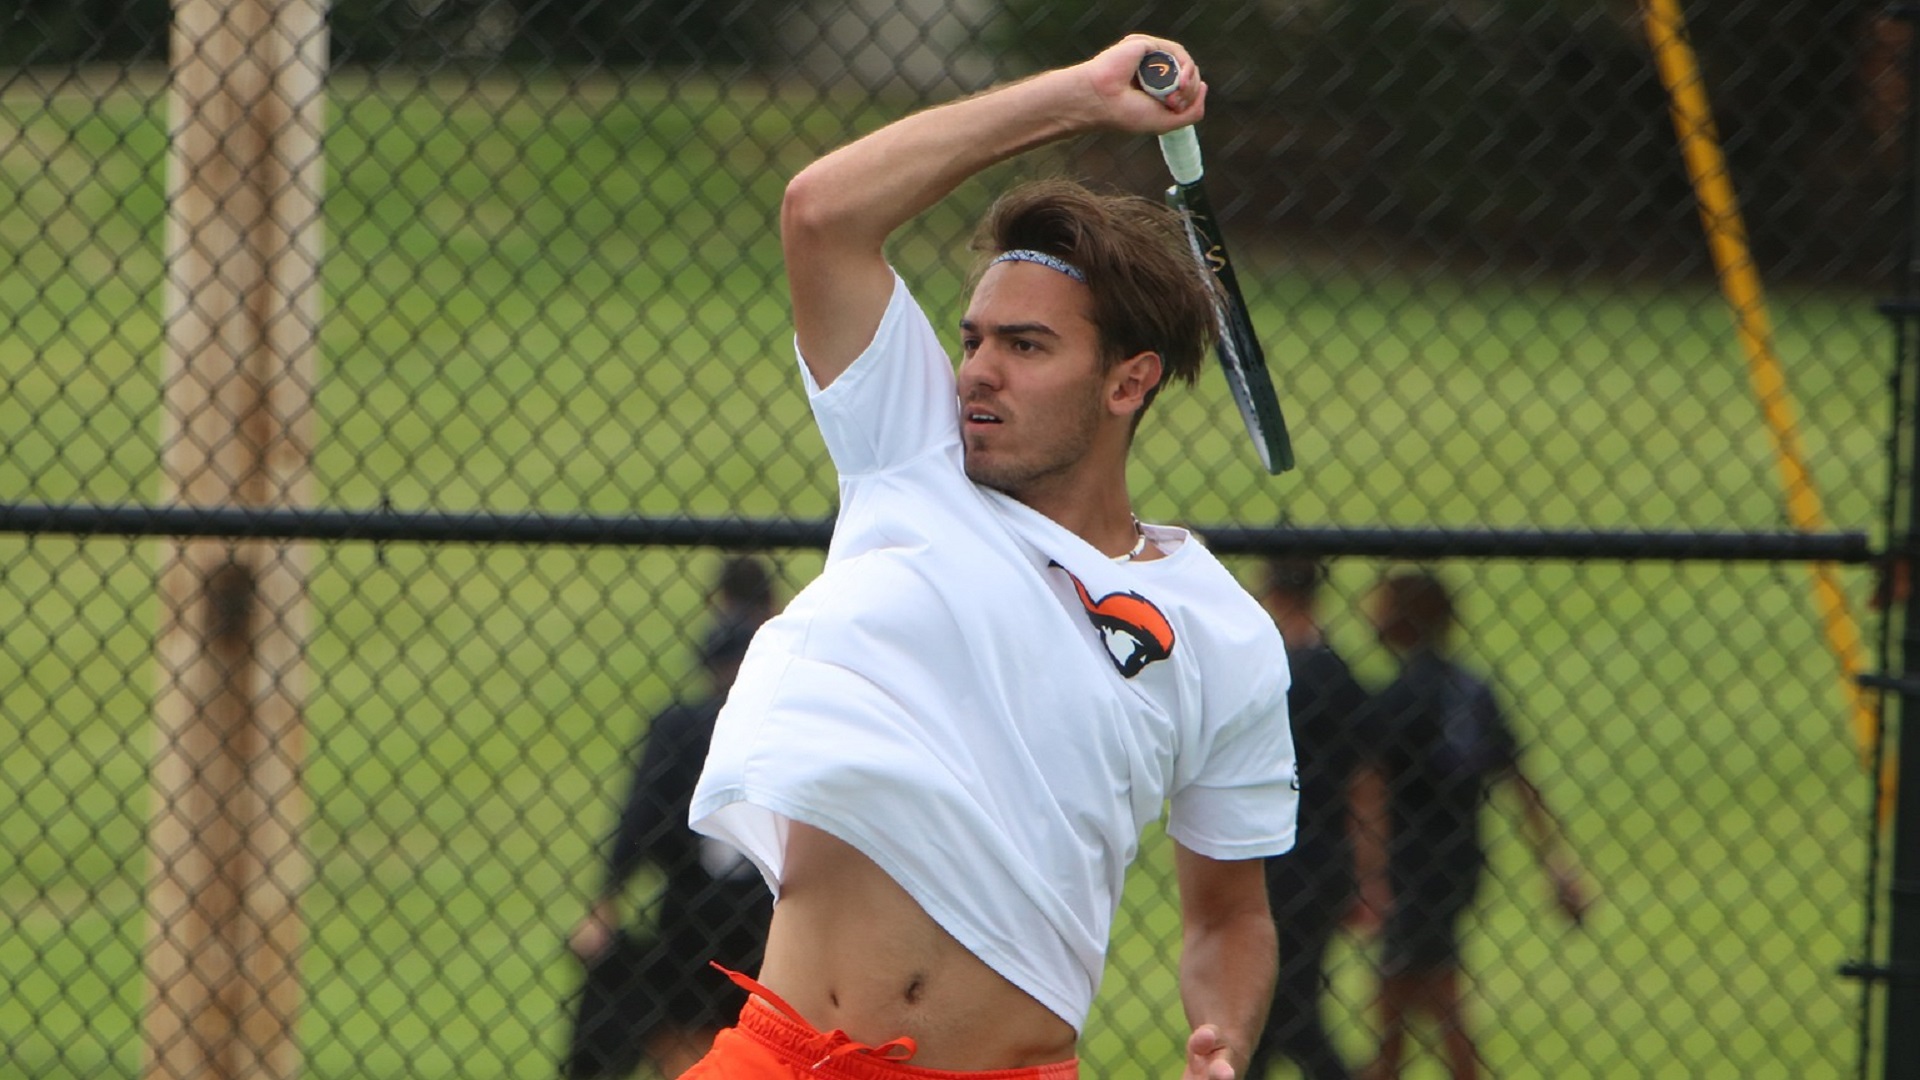 Tijn van Gorkom teamed with Rens Verhaar for a doubles win against Mars Hill (photo by TU Athletic Communications)